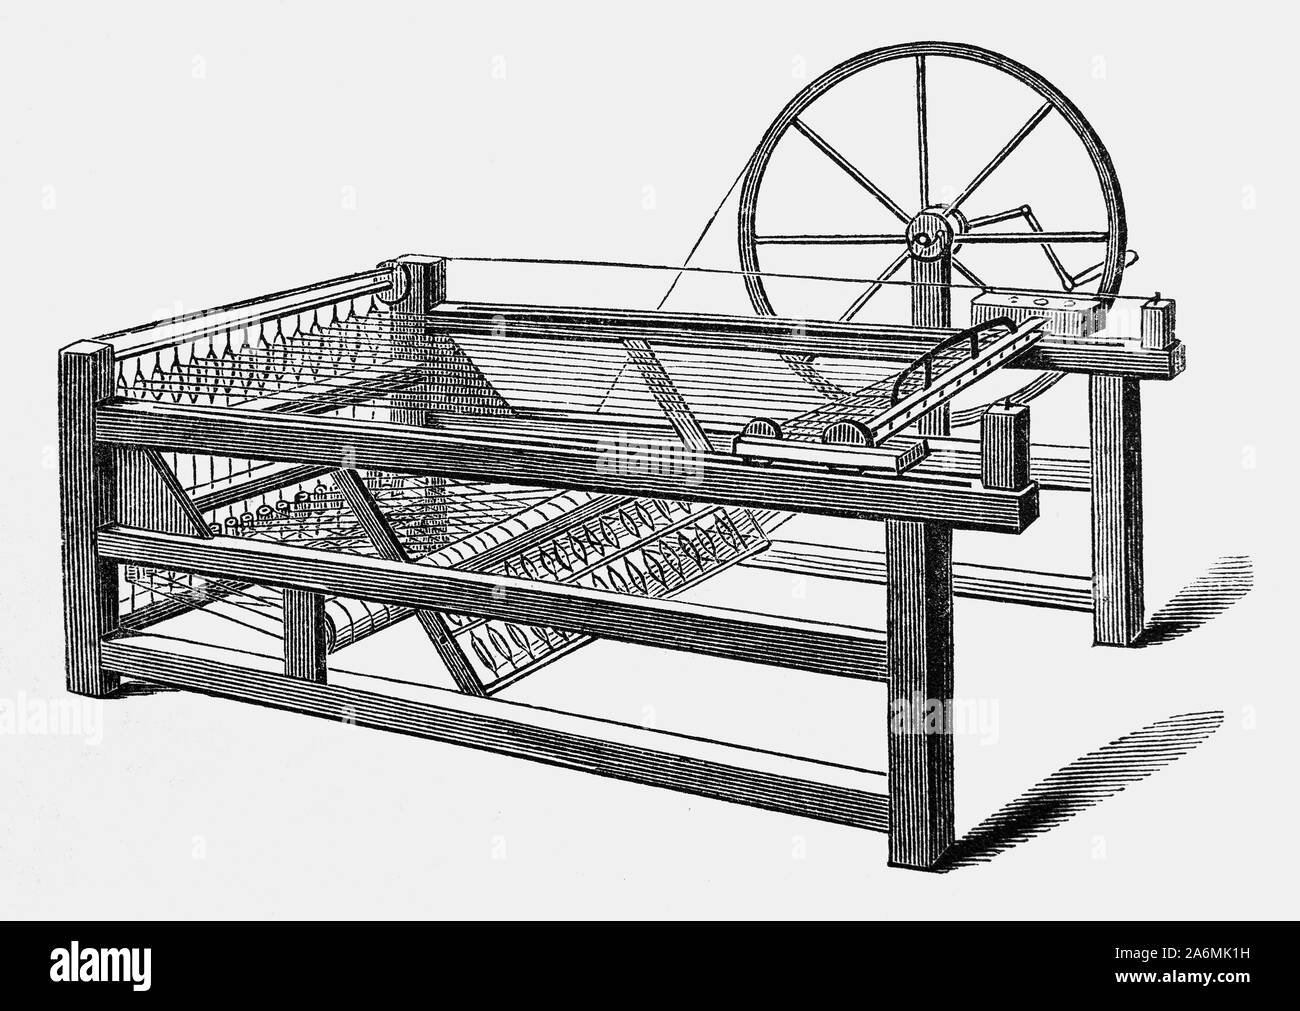 The spinning jenny is a multi-spindle spinning frame, invented in 1764 by James Hargreaves in Lancashire, England. It was one of the key developments in the industrialization of weaving during the early Industrial Revolution. The device reduced the amount of work needed to produce cloth, with a worker able to work eight or more spools at once. This grew to 120 as technology advanced. The yarn produced was not very strong until Richard Arkwright invented the water-powered water frame, which produced yarn harder and stronger than that of the initial spinning jenny starting the factory system. Stock Photo